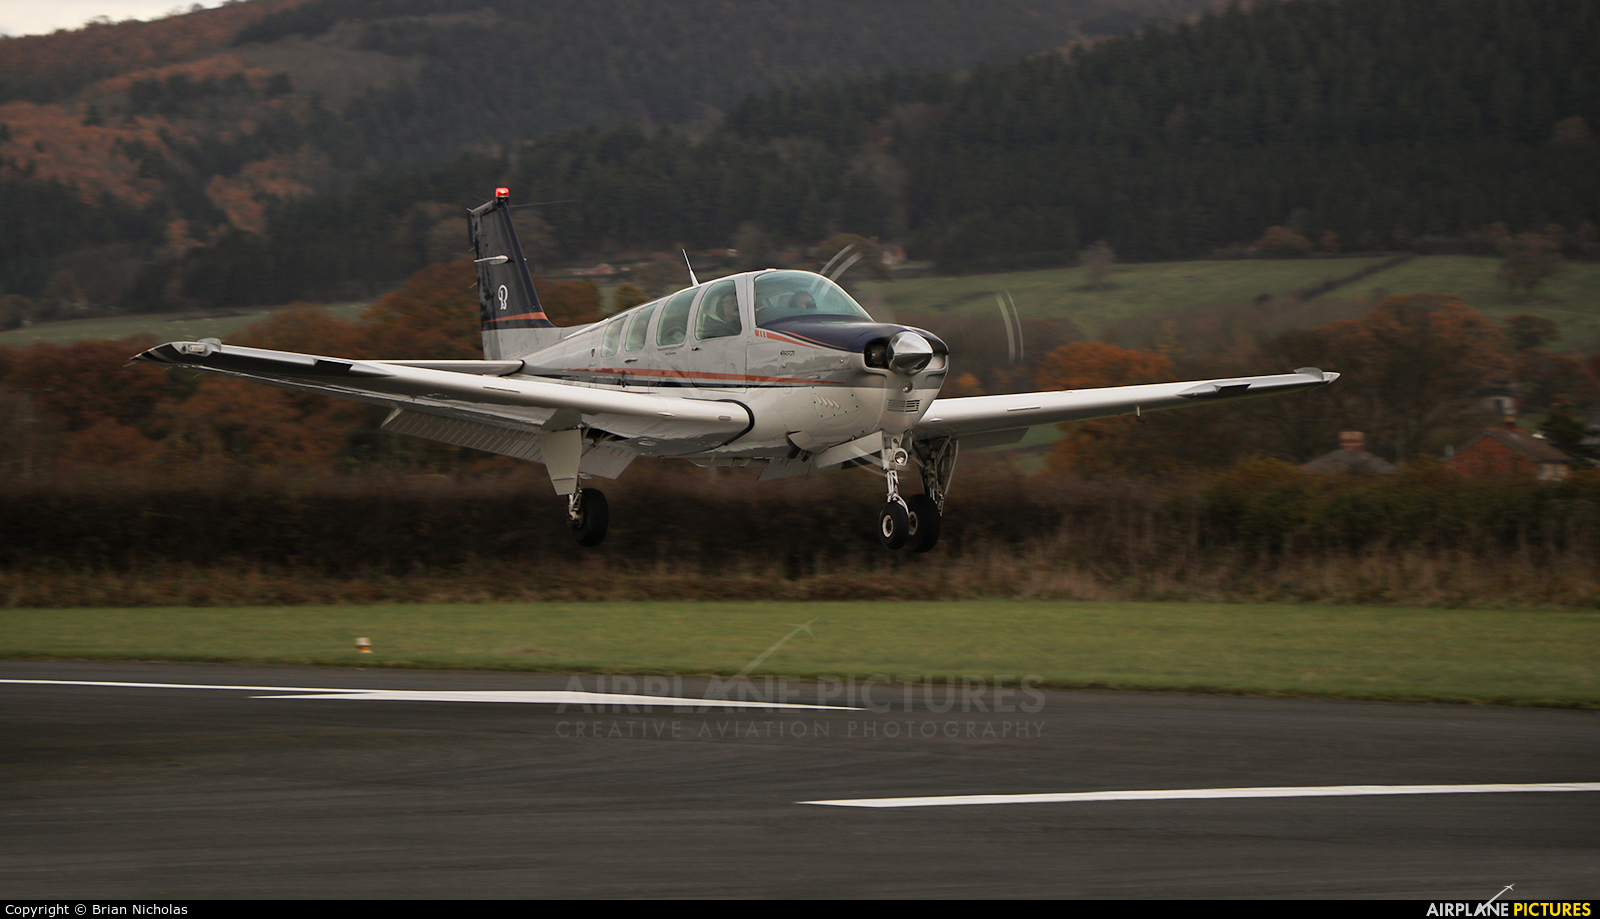 Private G-JLHS aircraft at Welshpool